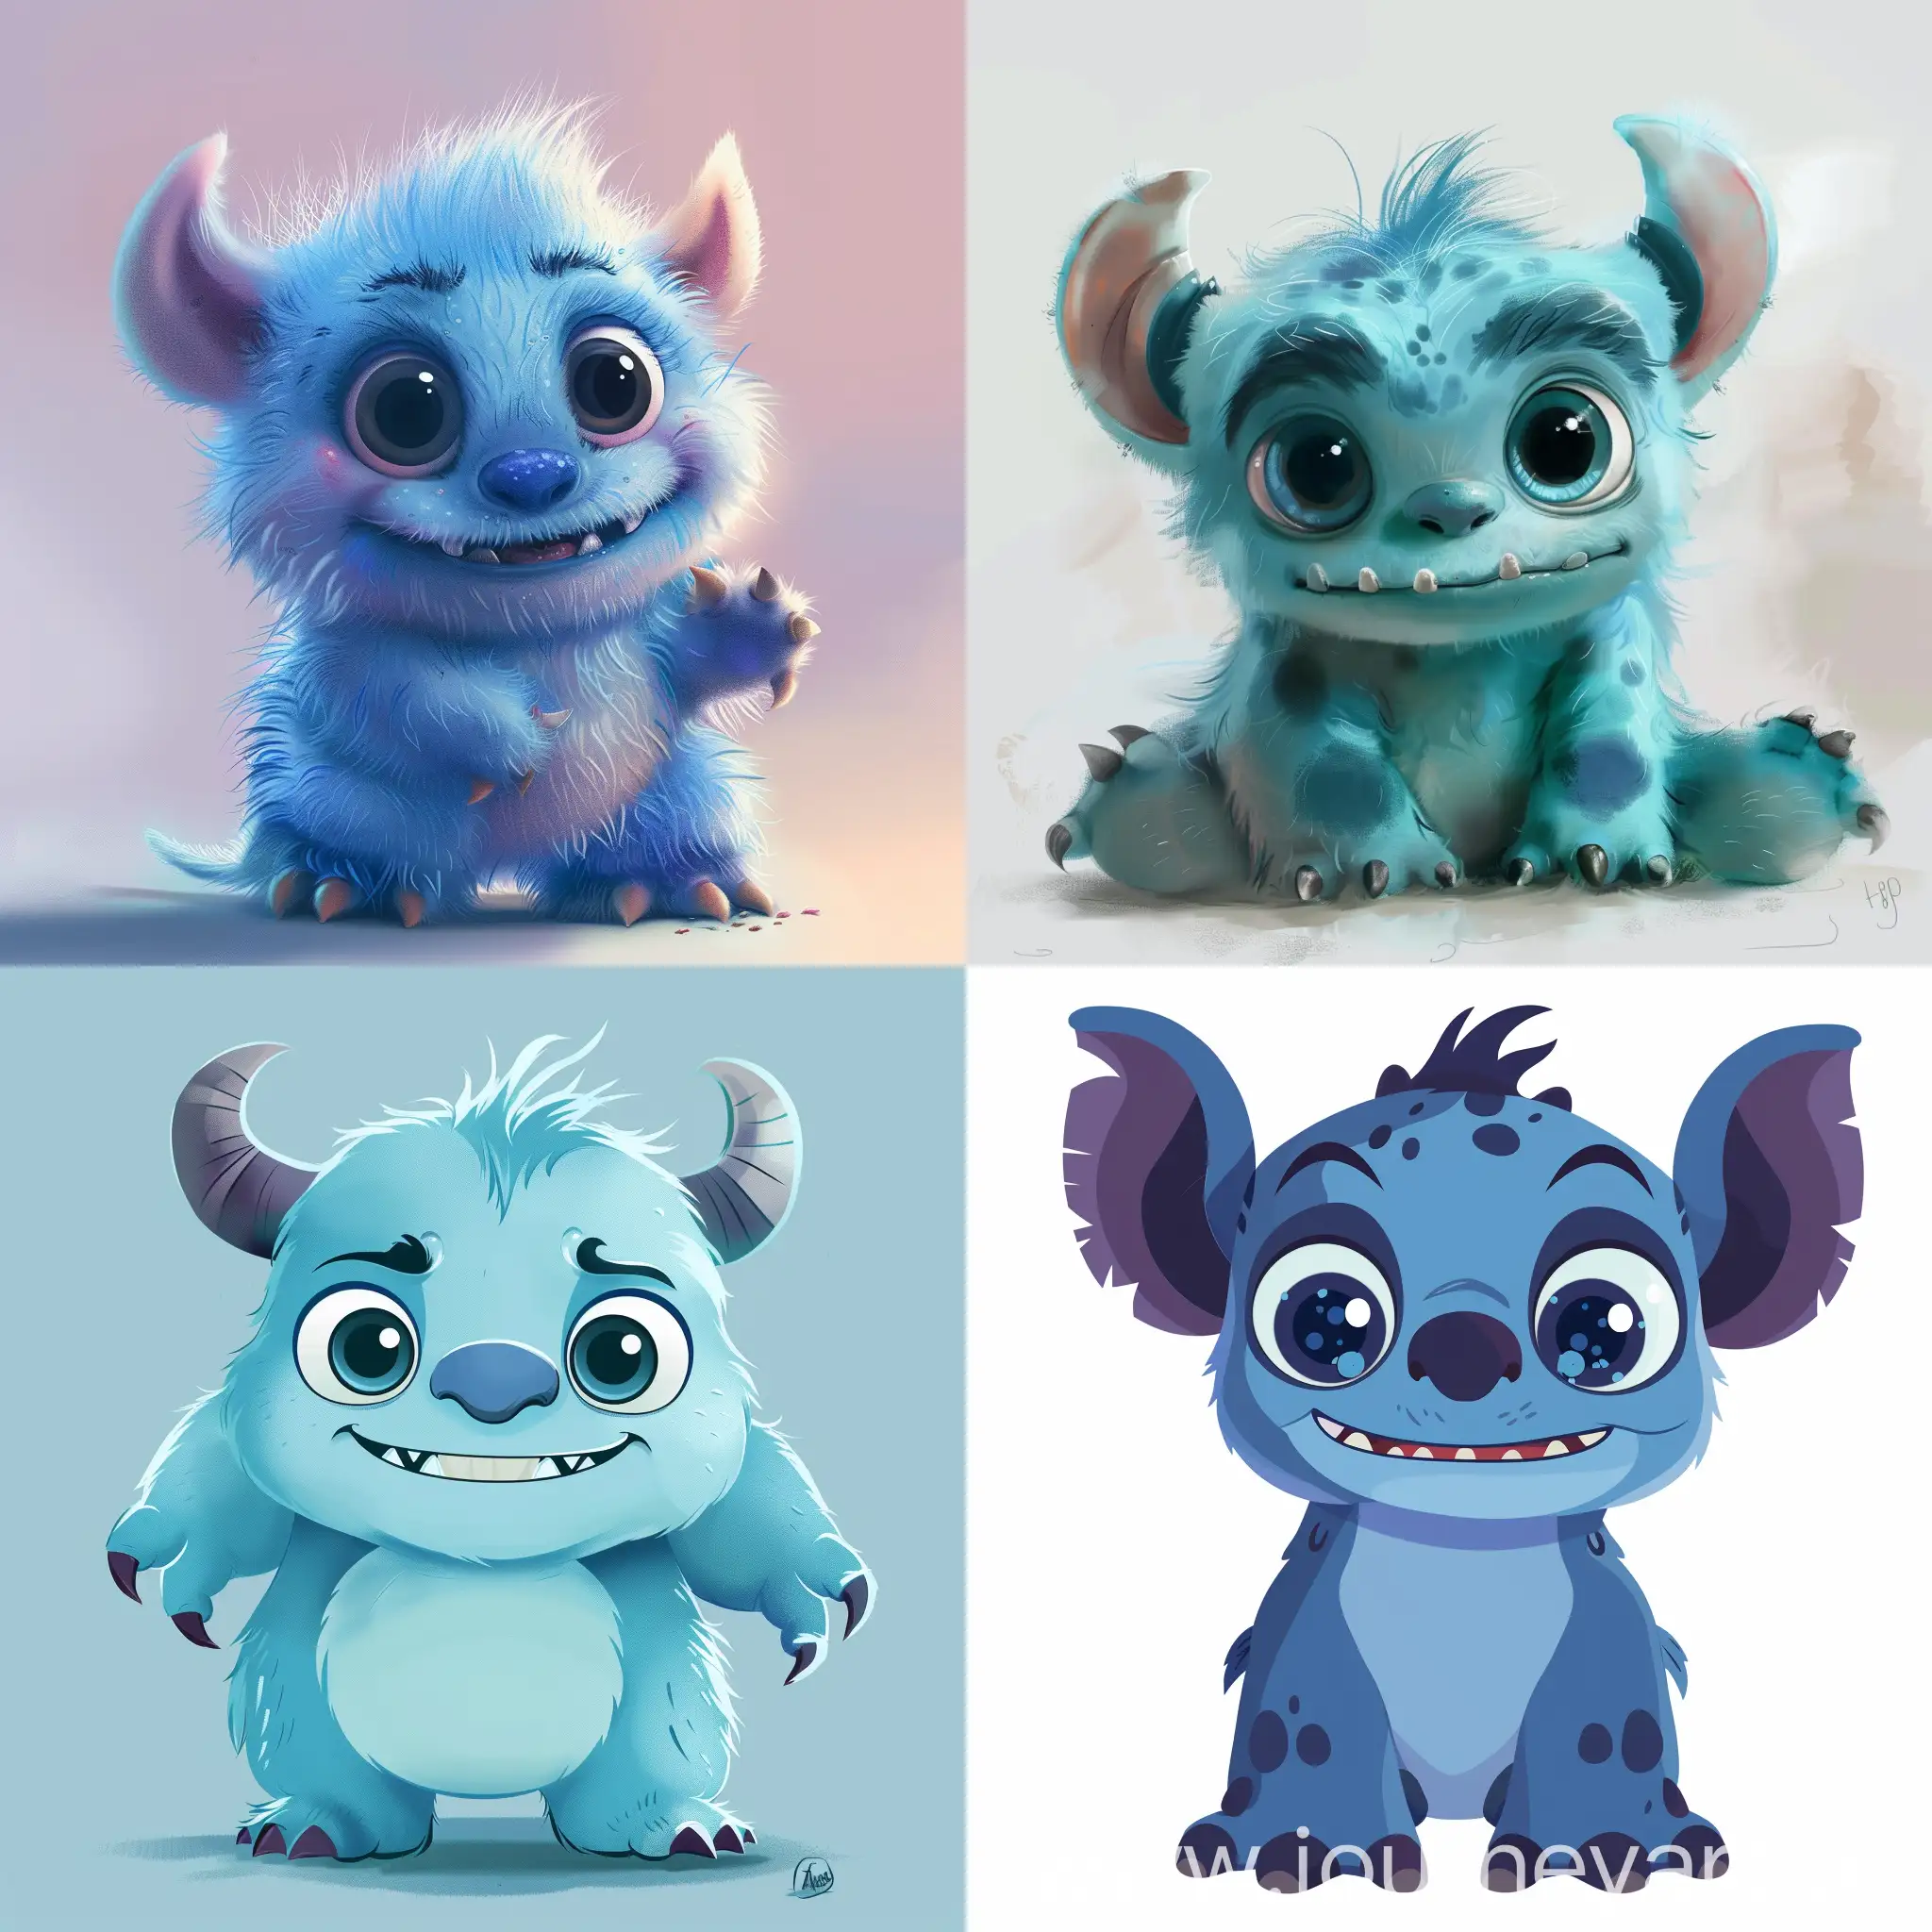 Adorable-DisneyStyle-Little-Monster-Playful-and-Sweet-Creature-Art